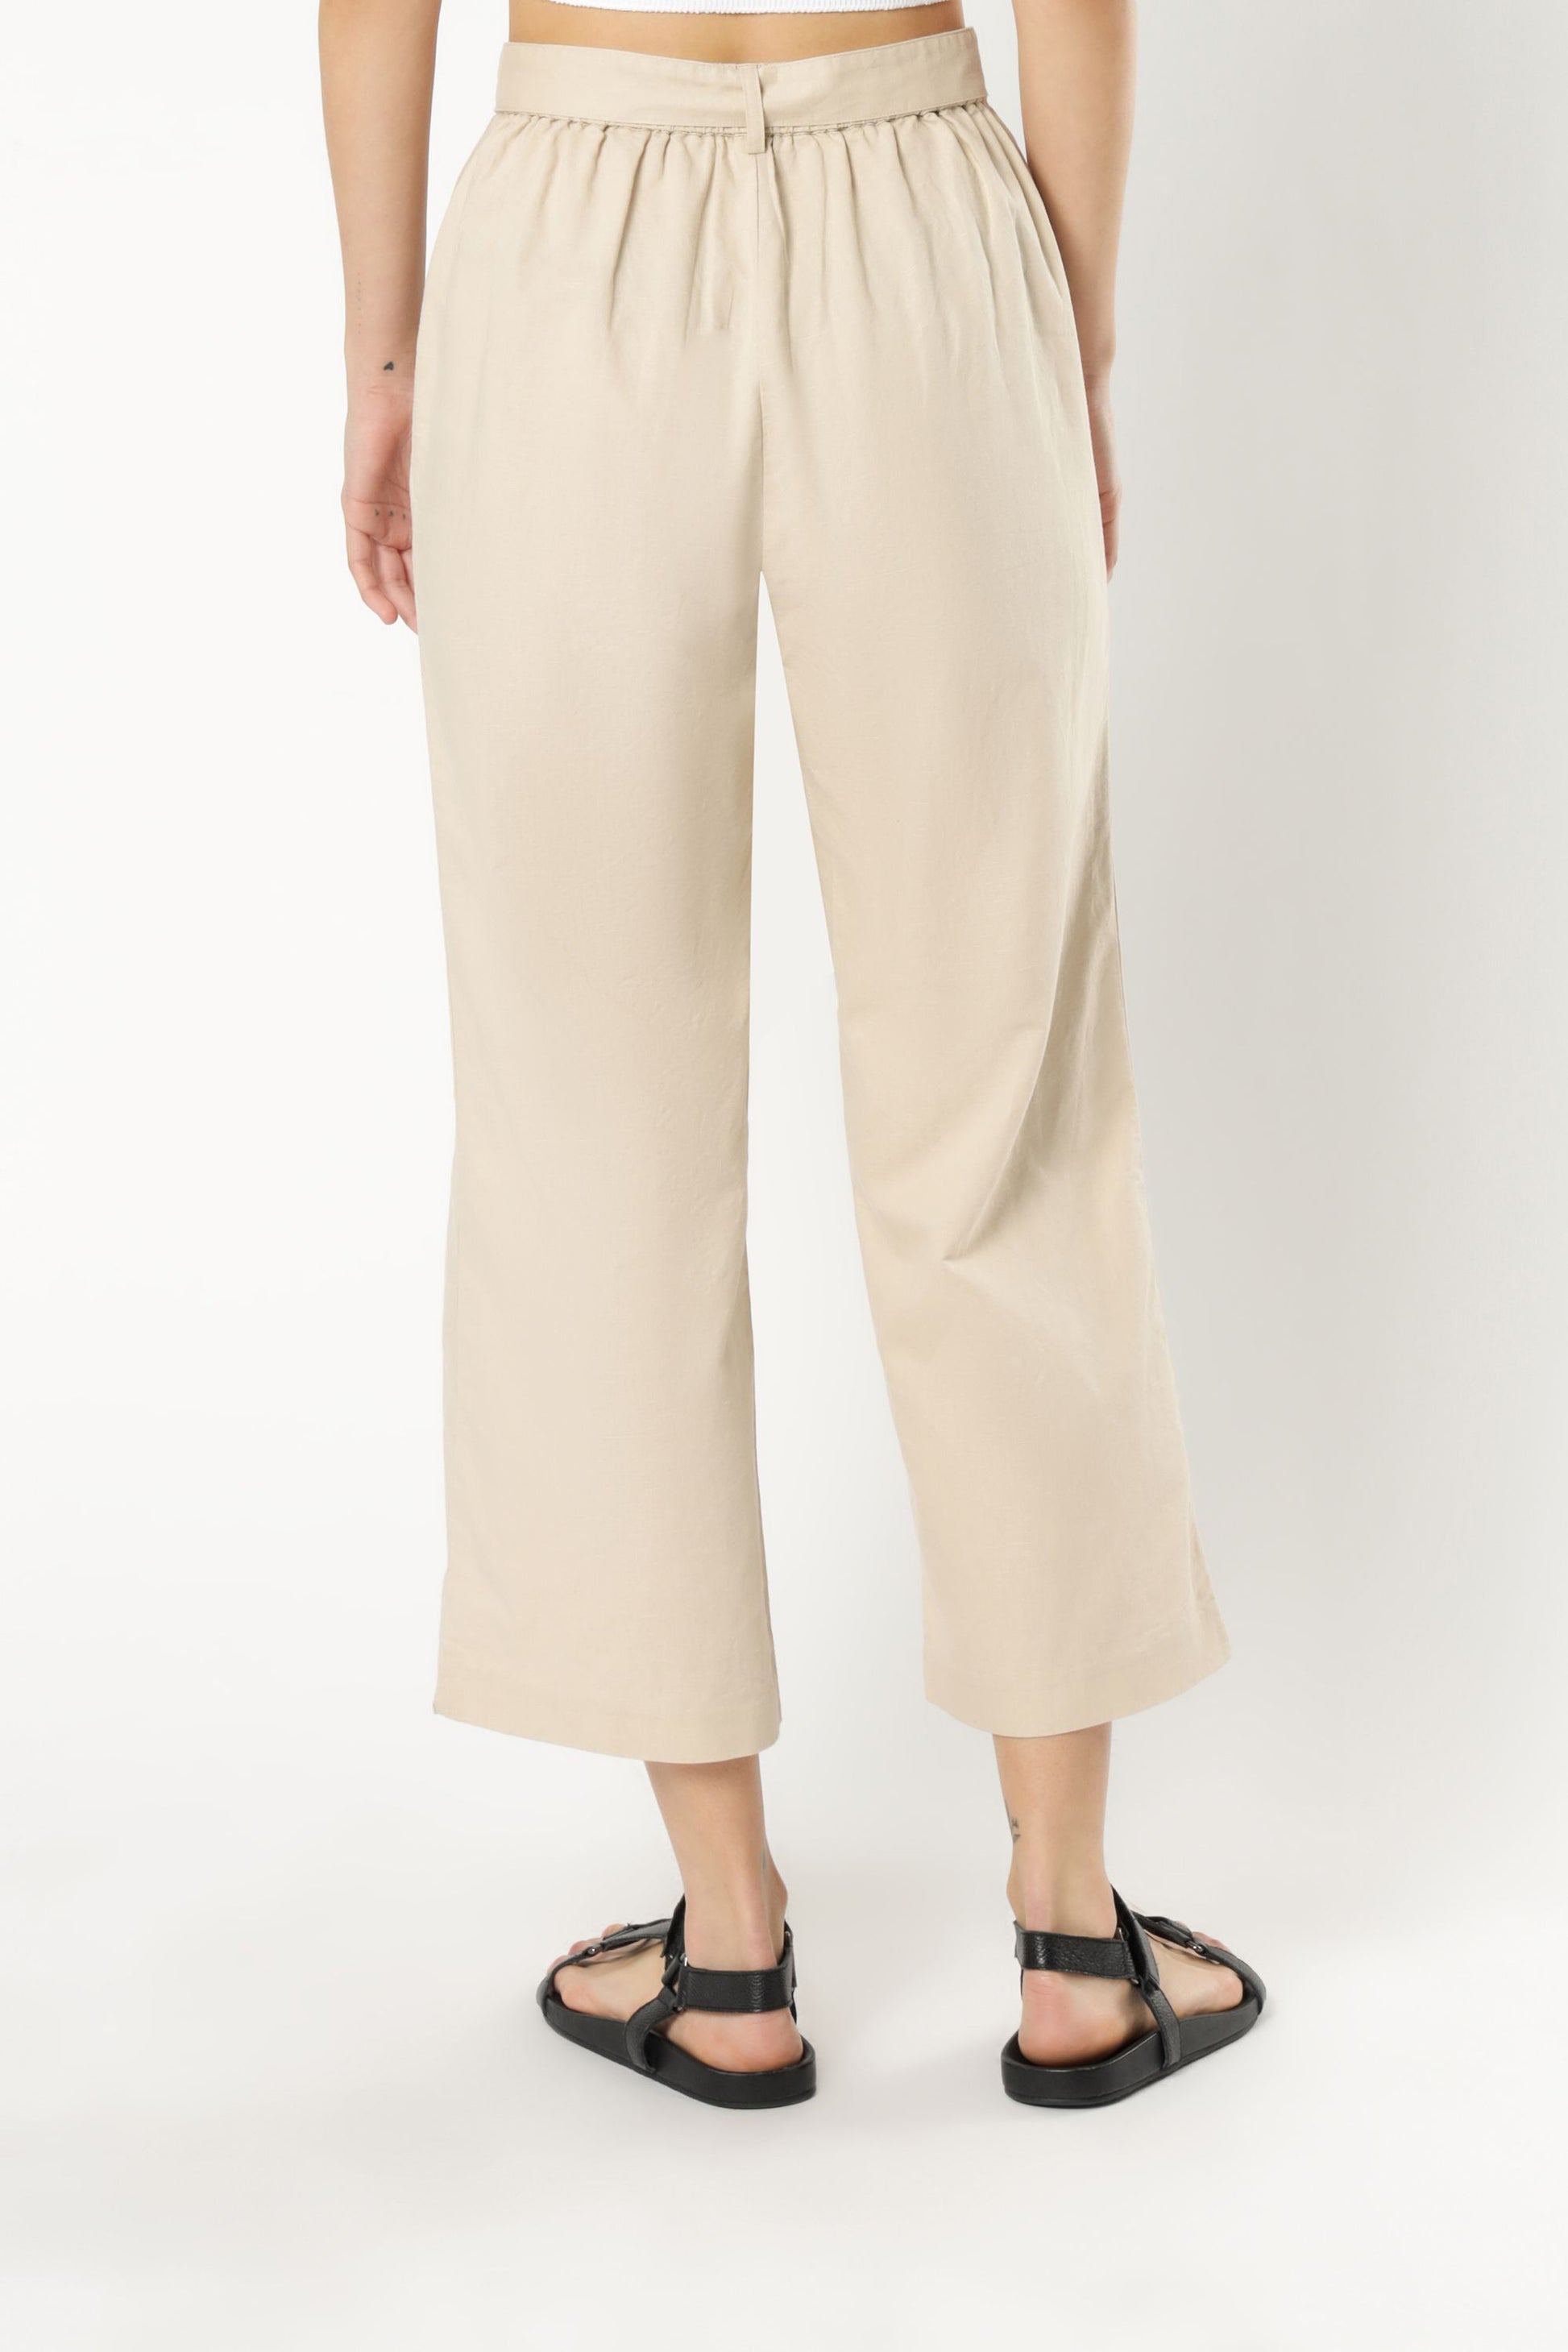 Nude Lucy brynn wide leg pant sand pants